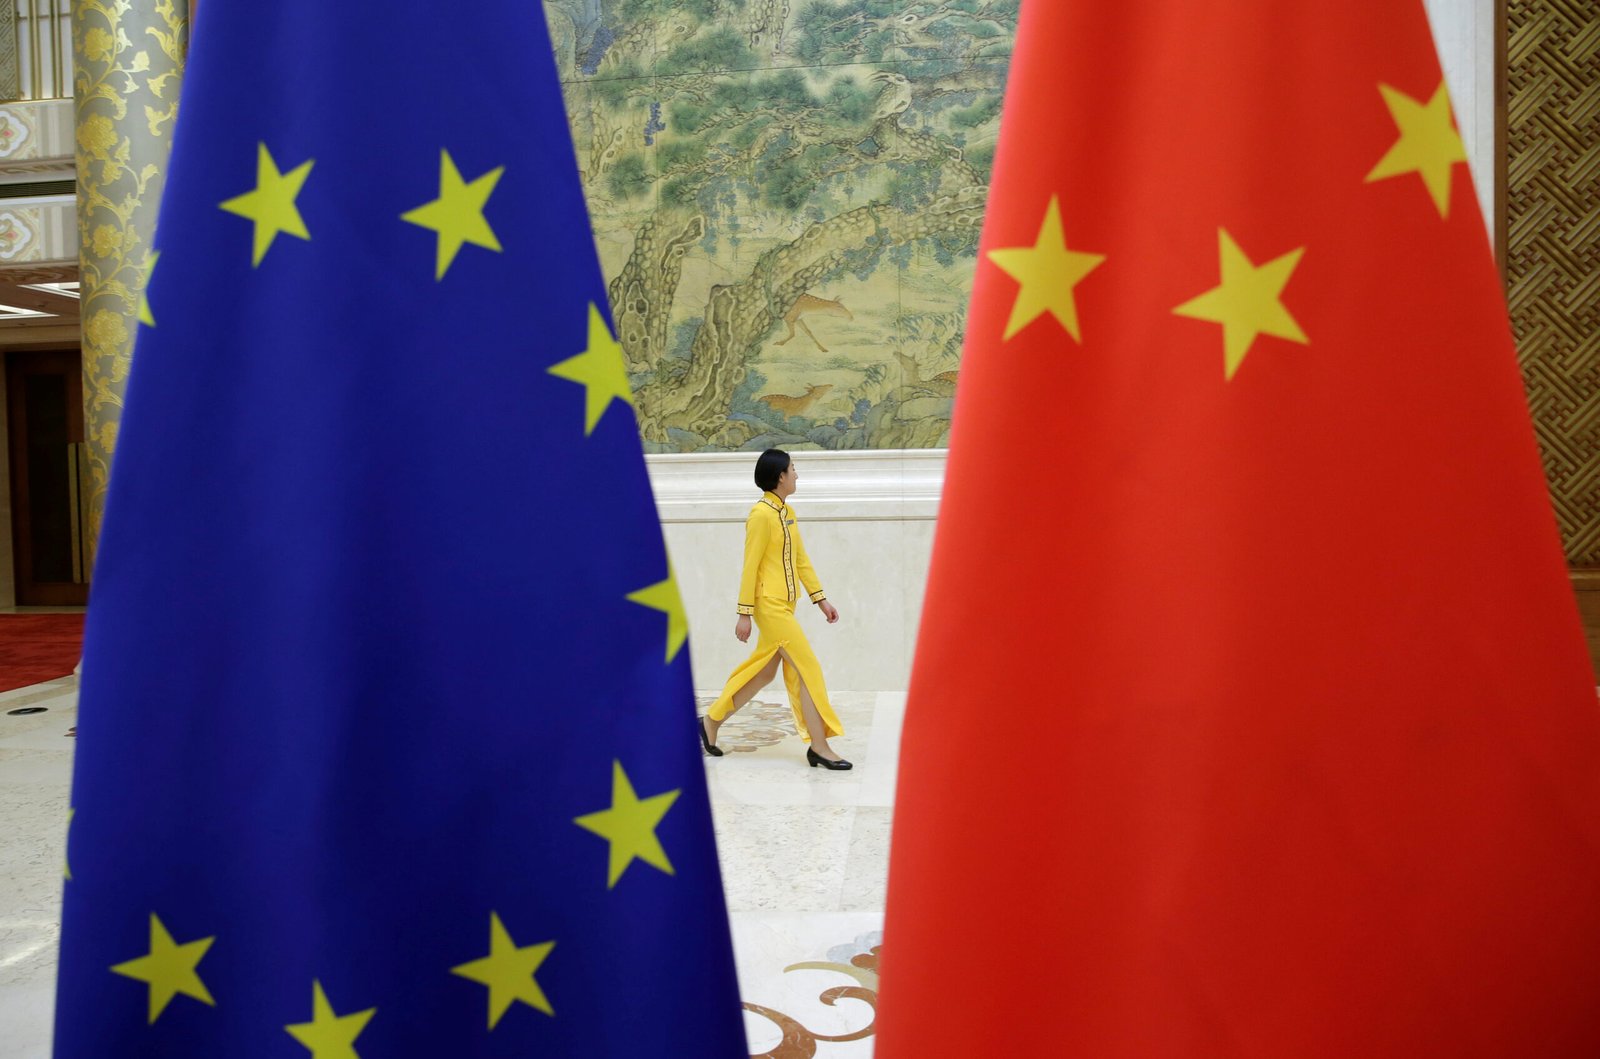 eu-says-lack-of-clarity-in-china’s-data-laws-is-concerning